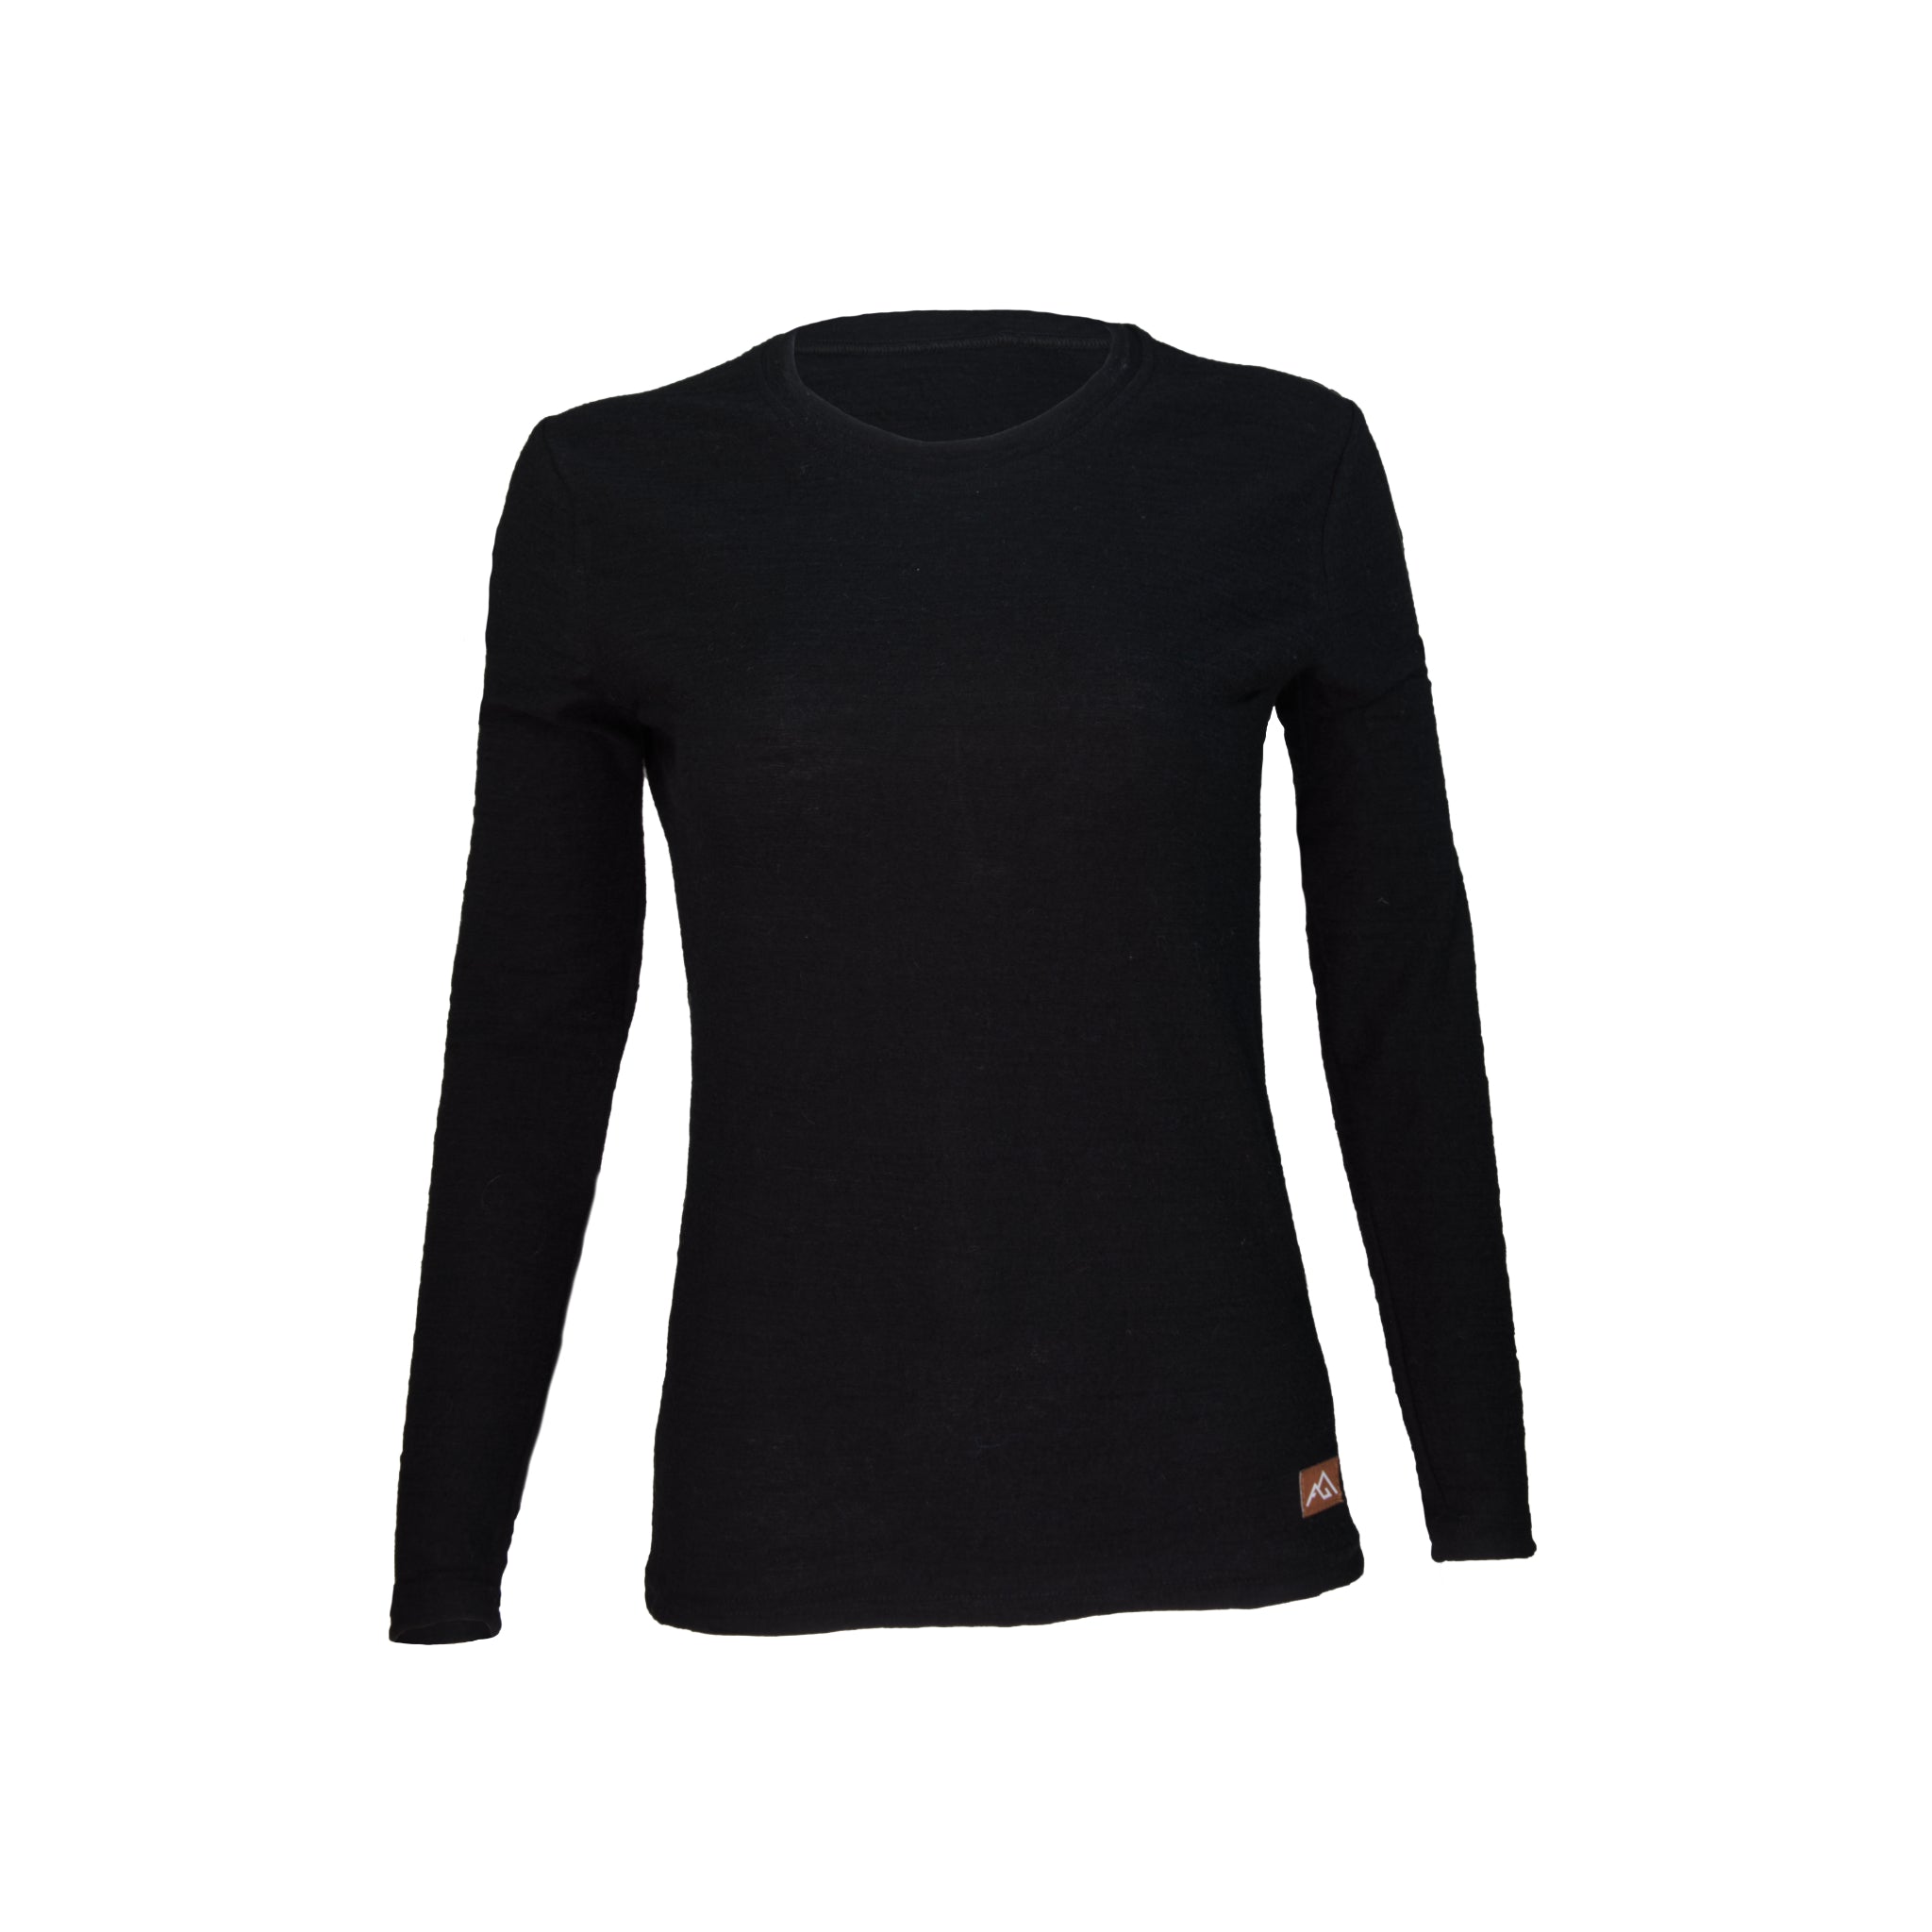 Eam Long Sleeves Top Featuring Cordura Fabric Graphite Black / Xs